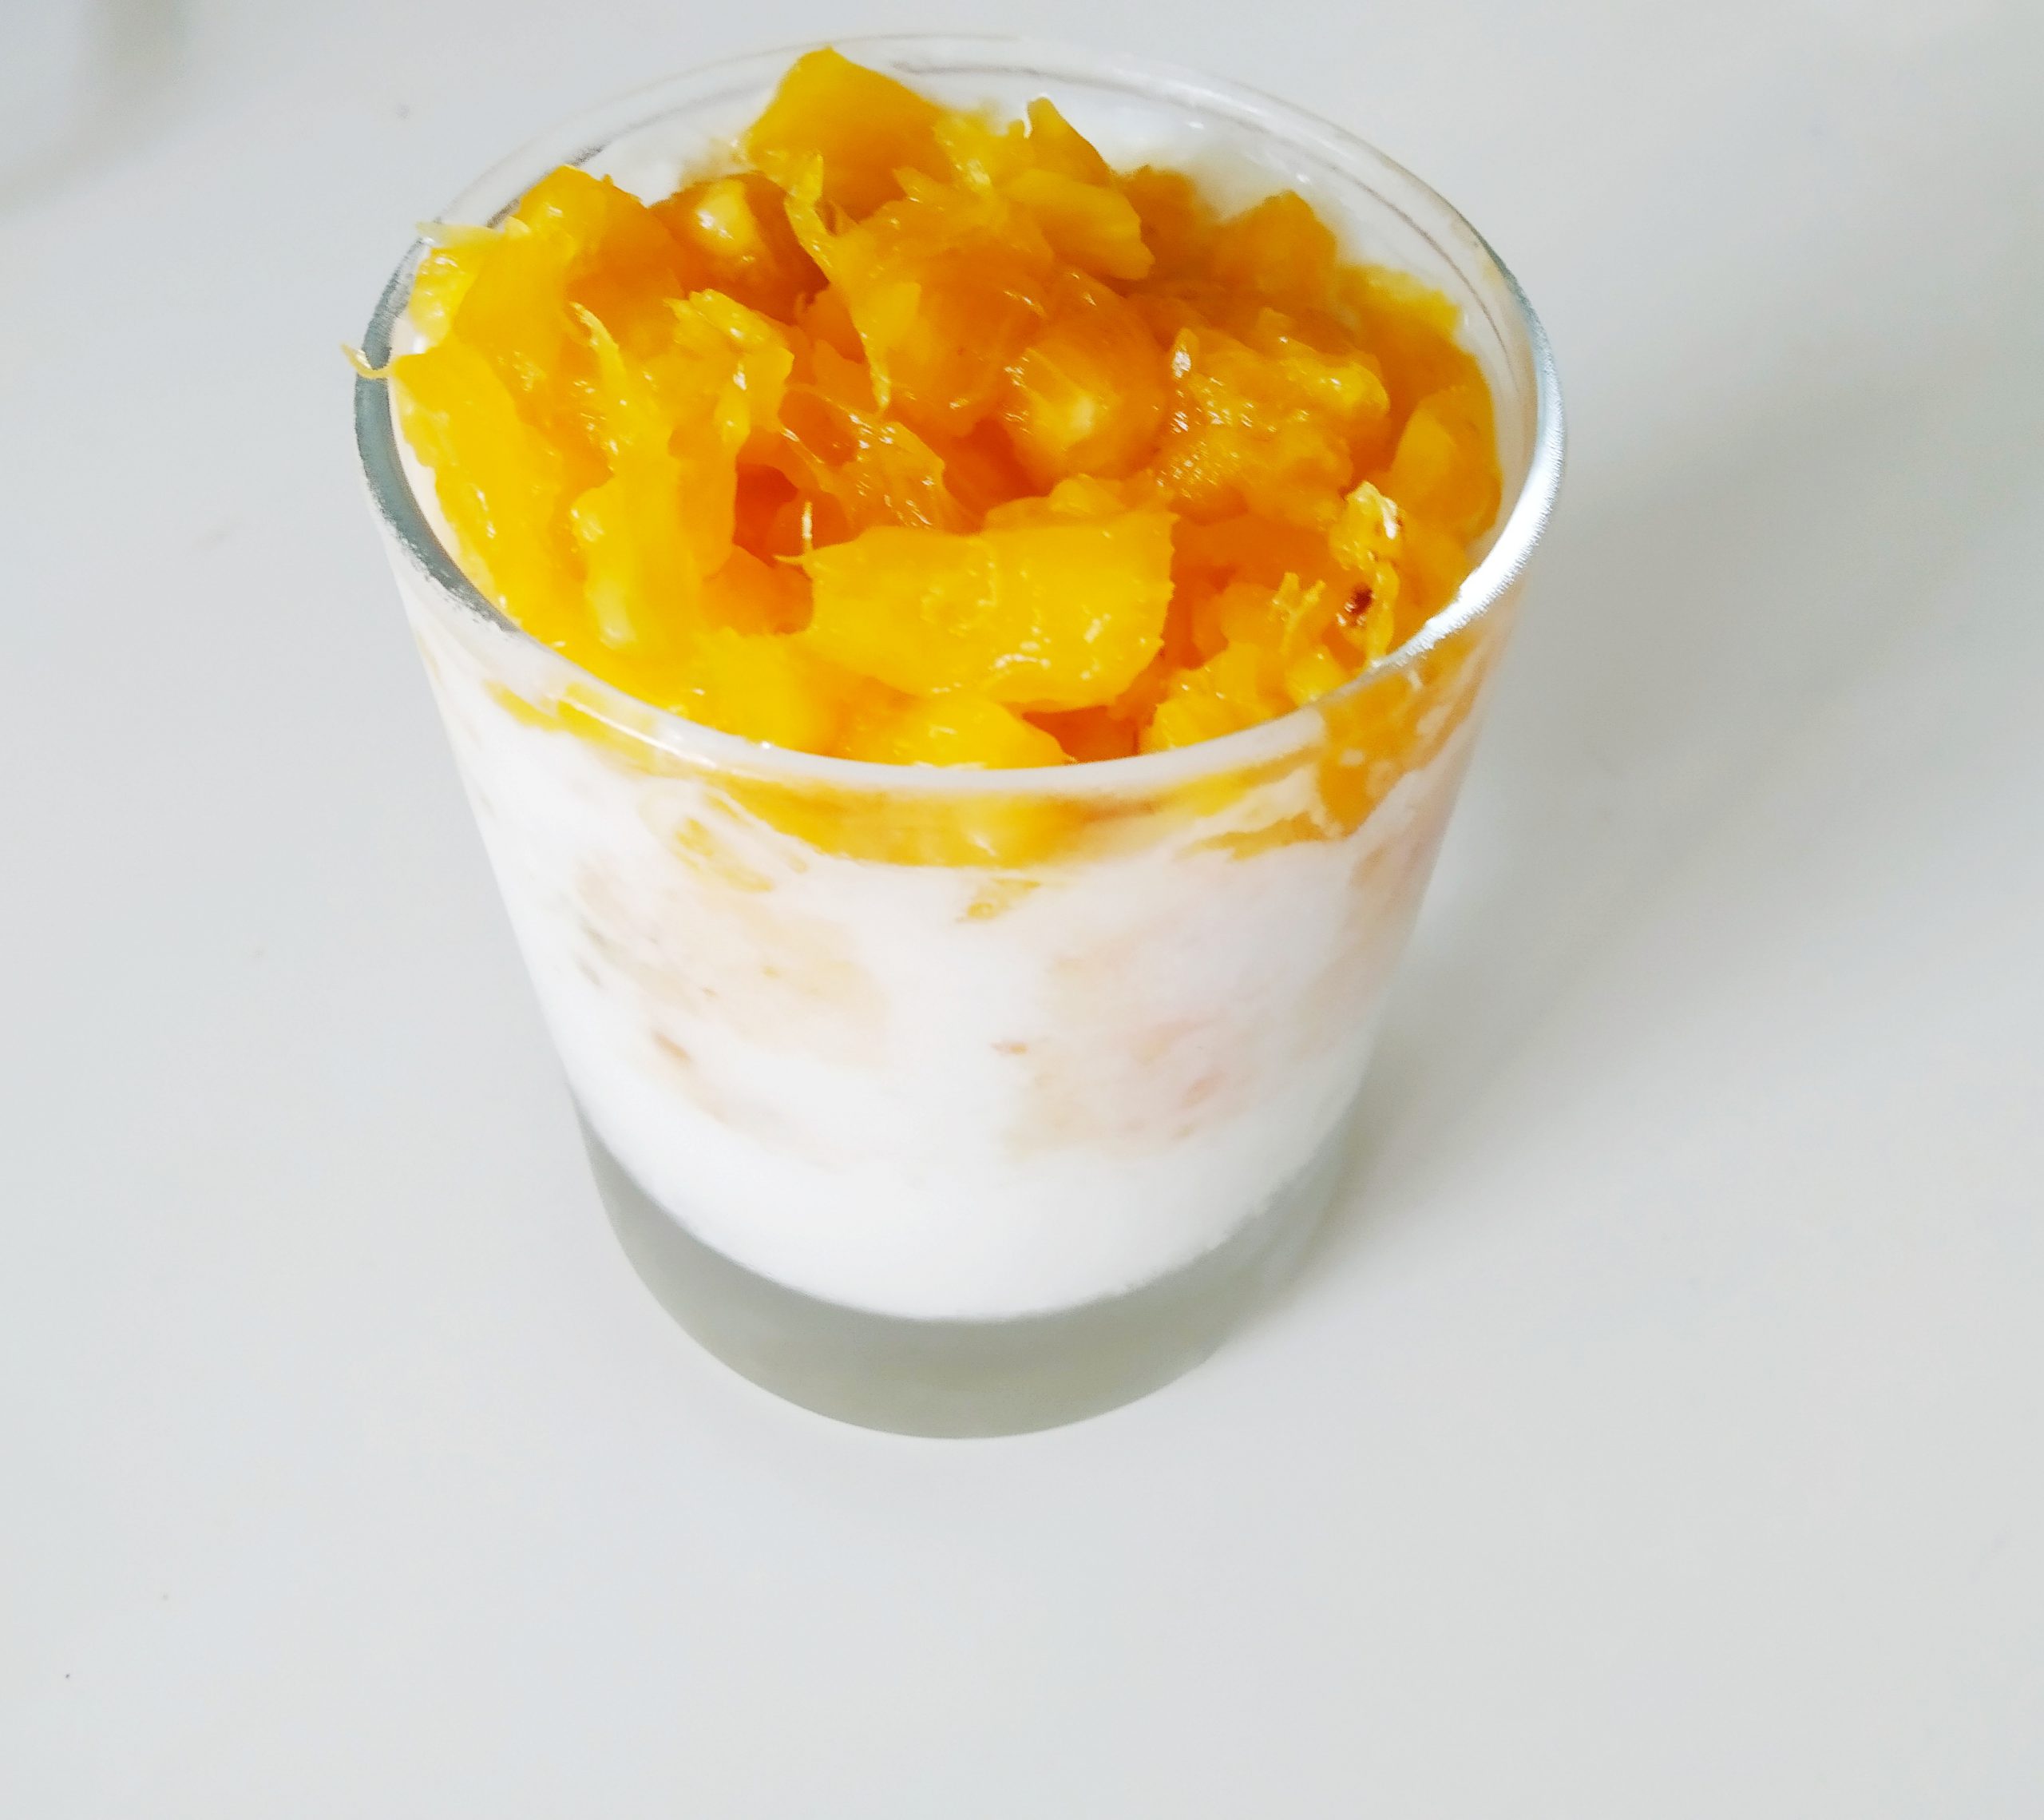 Pineapple pina colada pudding without any gelatin and alchohol